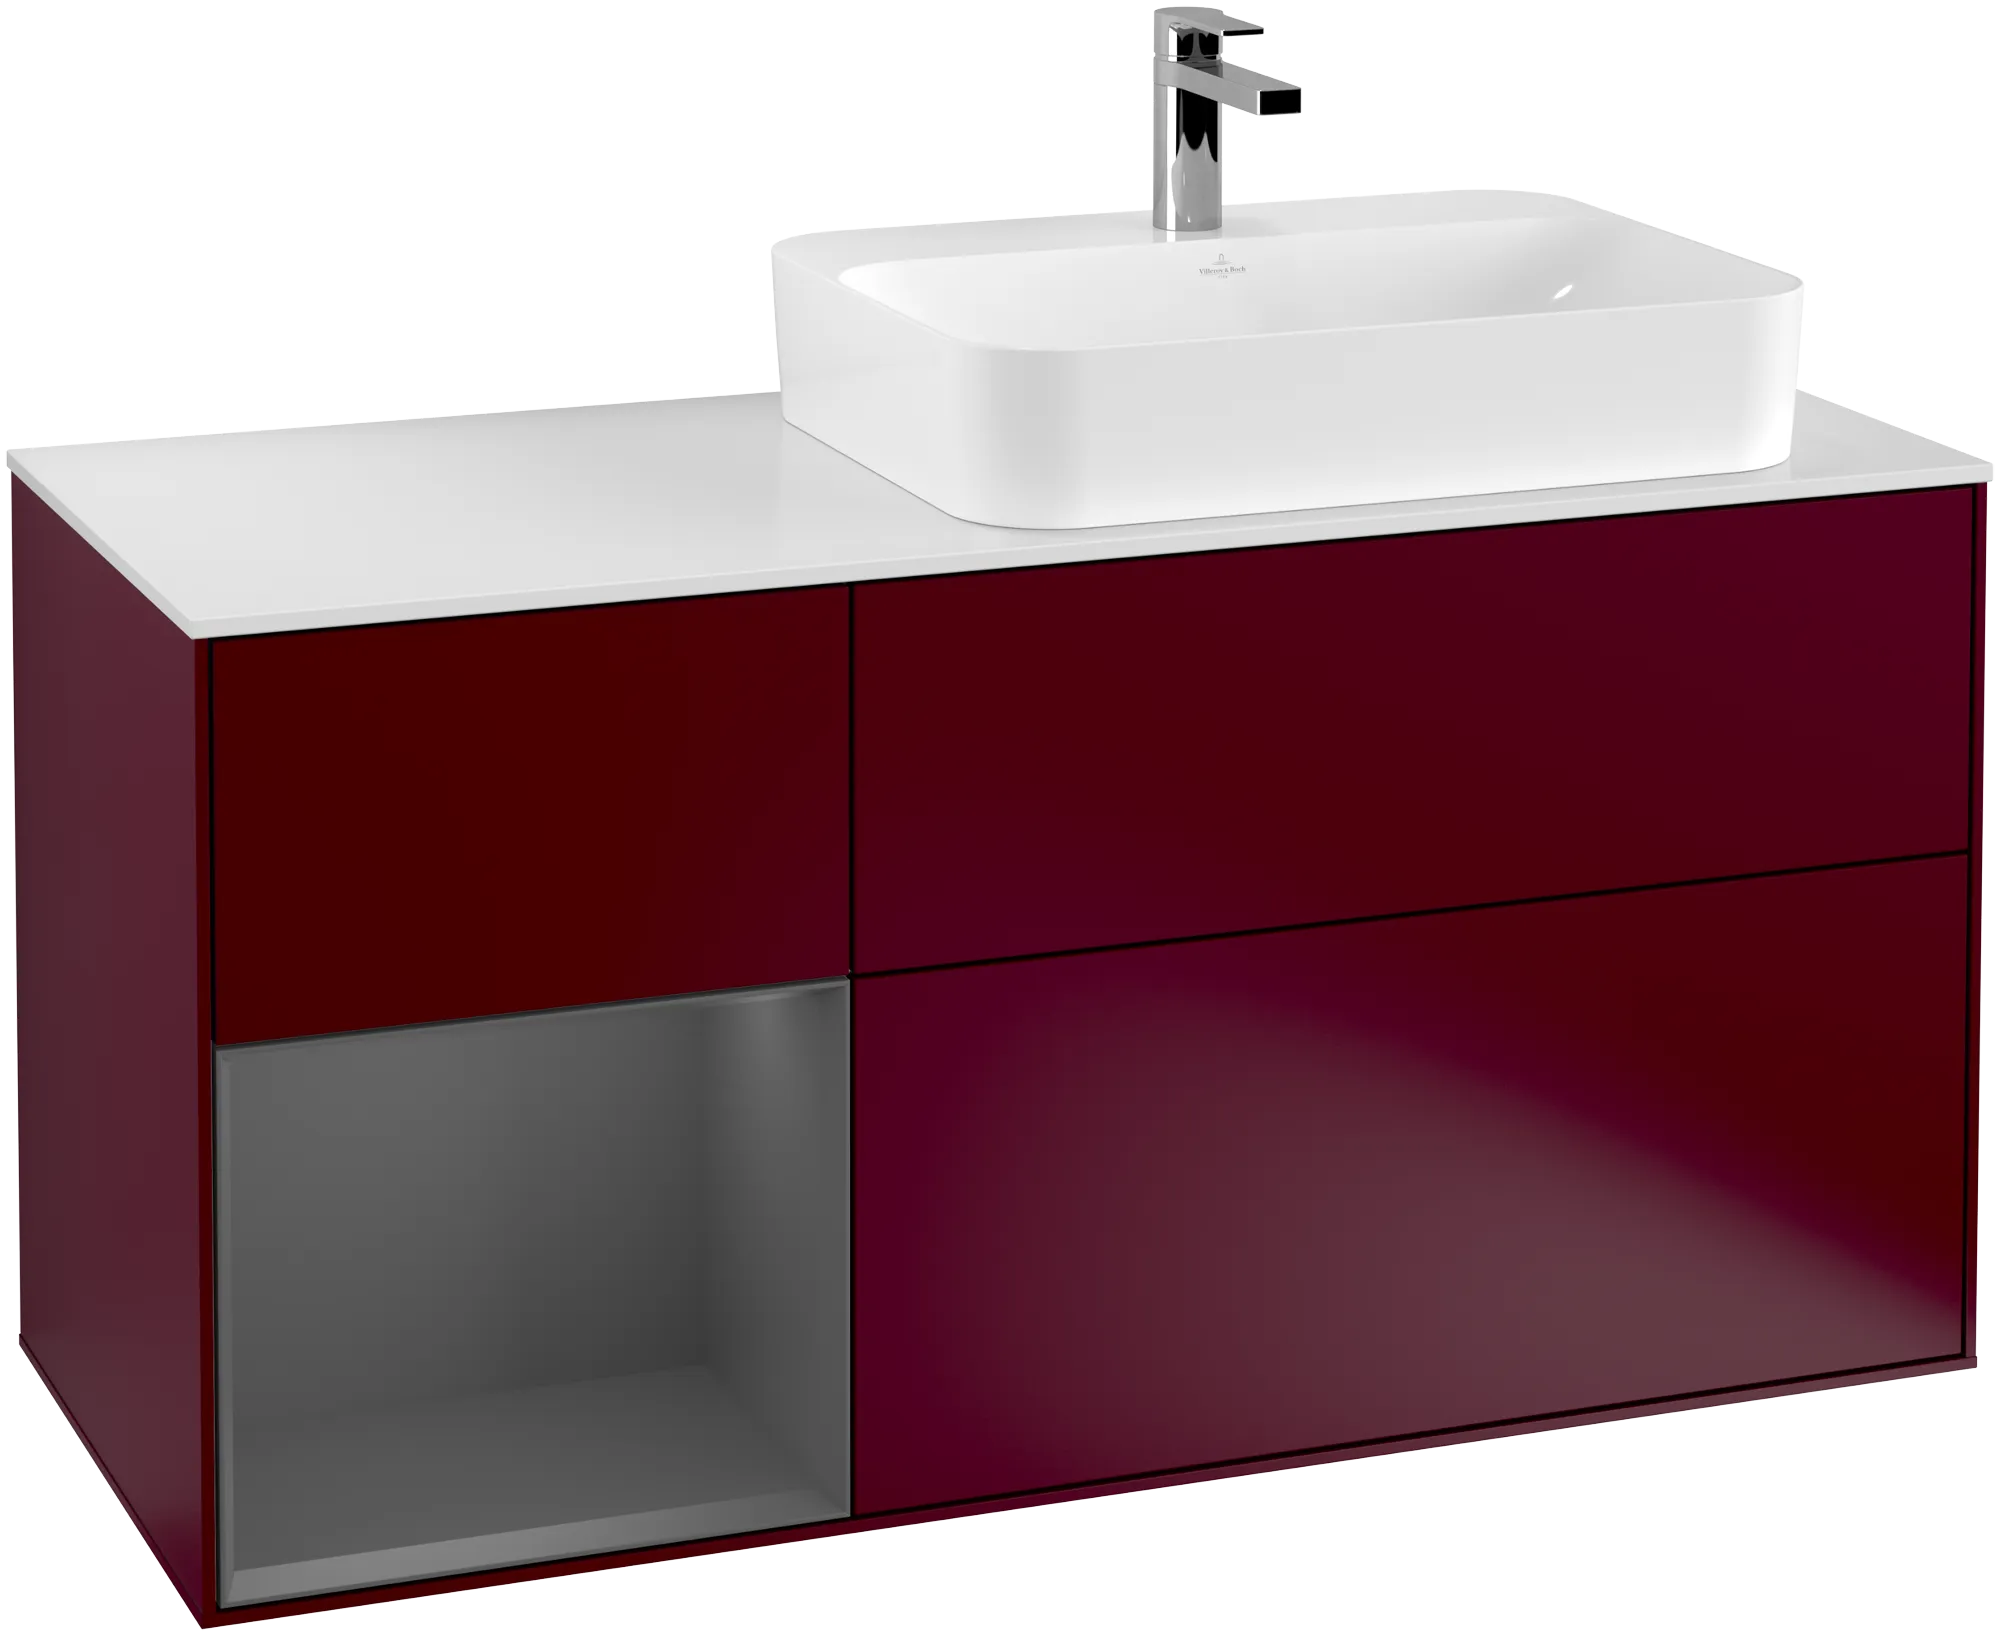 Obrázek VILLEROY BOCH Finion Vanity unit, with lighting, 3 pull-out compartments, 1200 x 603 x 501 mm, Peony Matt Lacquer / Anthracite Matt Lacquer / Glass White Matt #G391GKHB